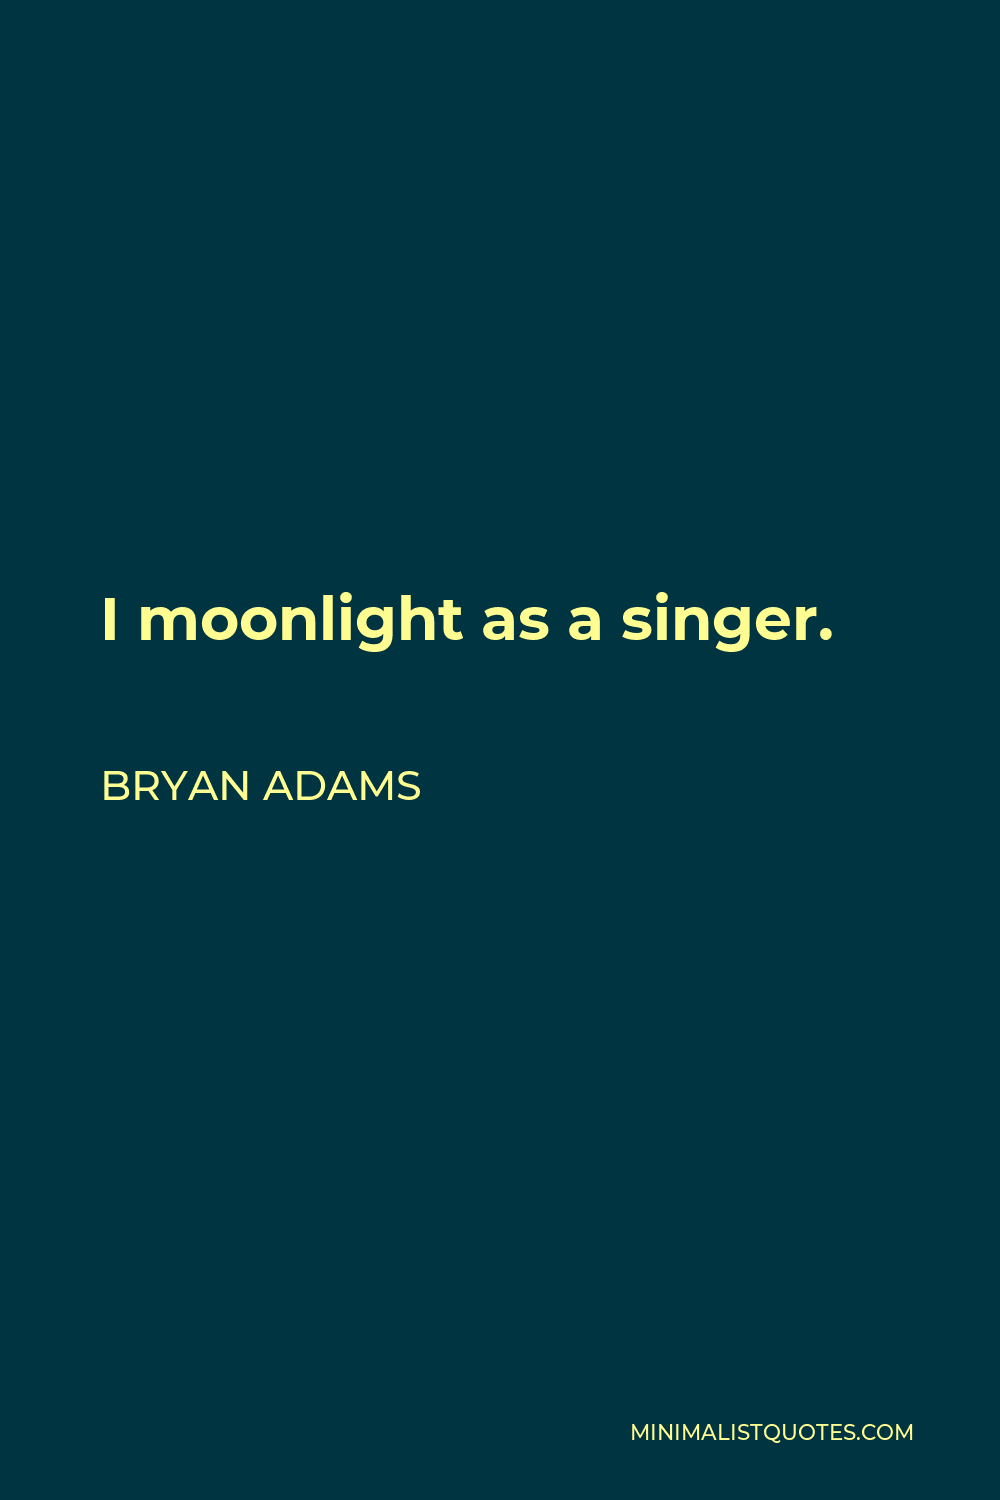 Bryan Adams Quote - I moonlight as a singer.